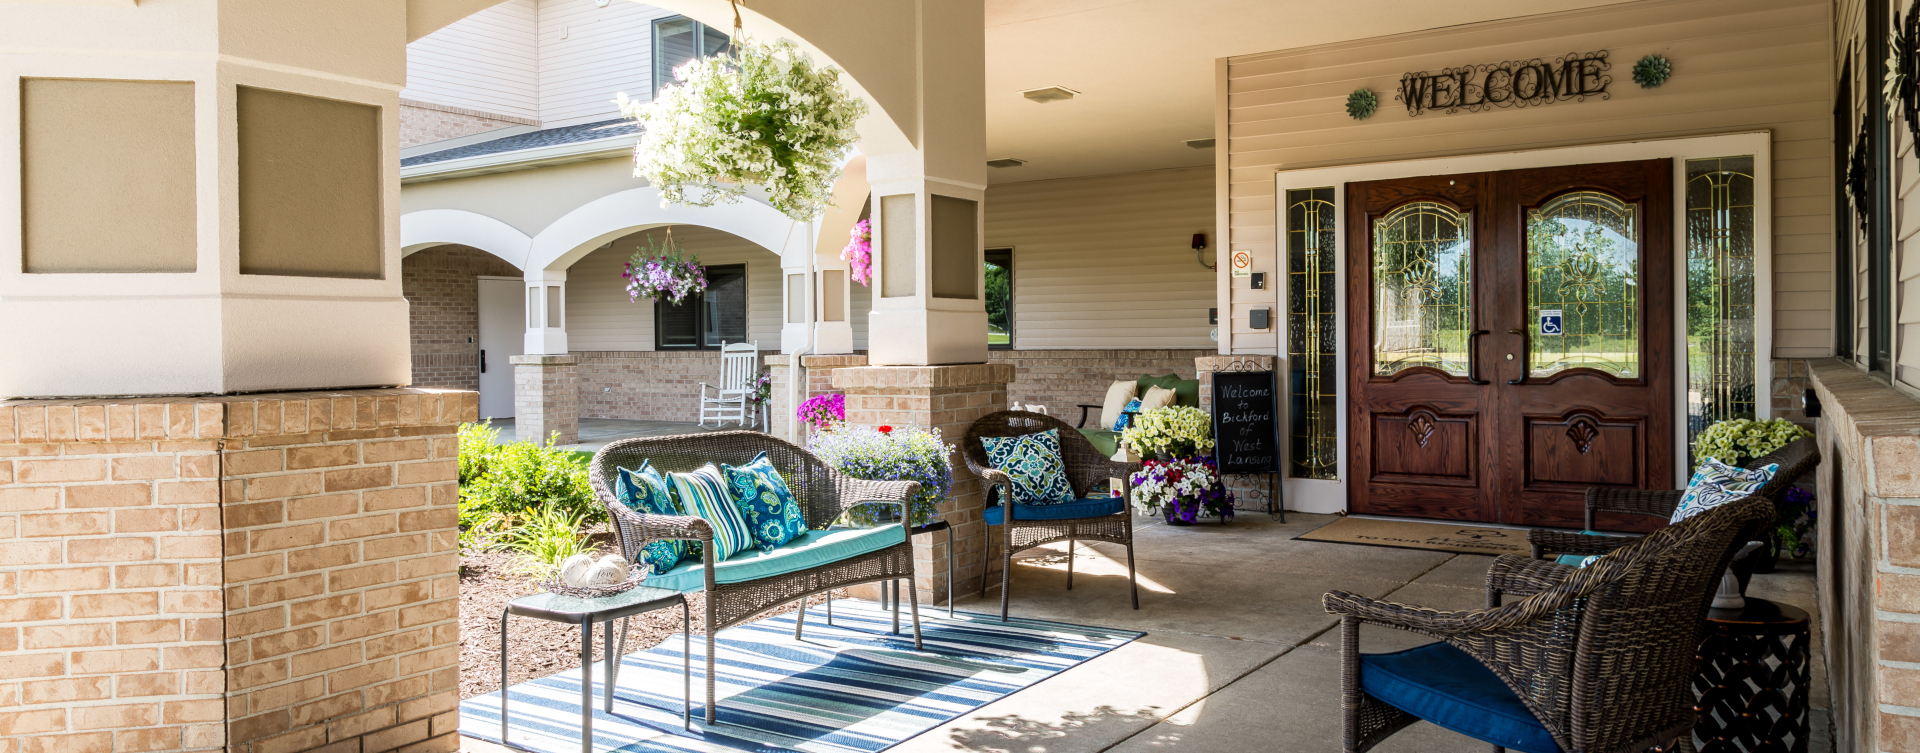 Relax in your favorite chair on the porch at Bickford of West Lansing